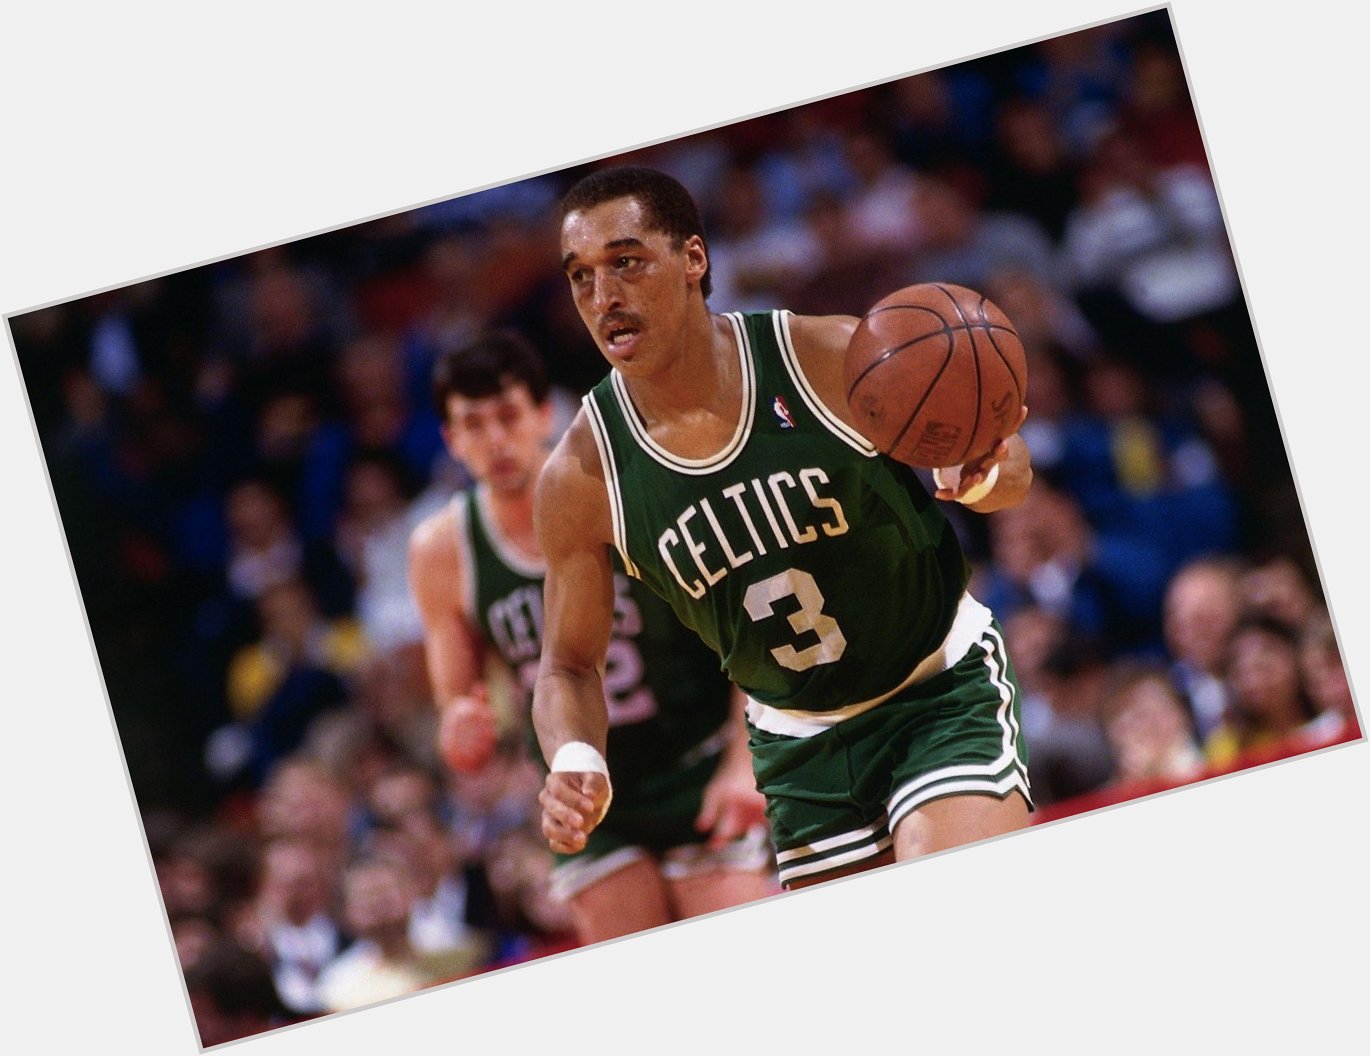 Happy birthday to the late Celtics legend, Dennis Johnson! Johnson was named to 9 STRAIGHT all-defensive teams. 